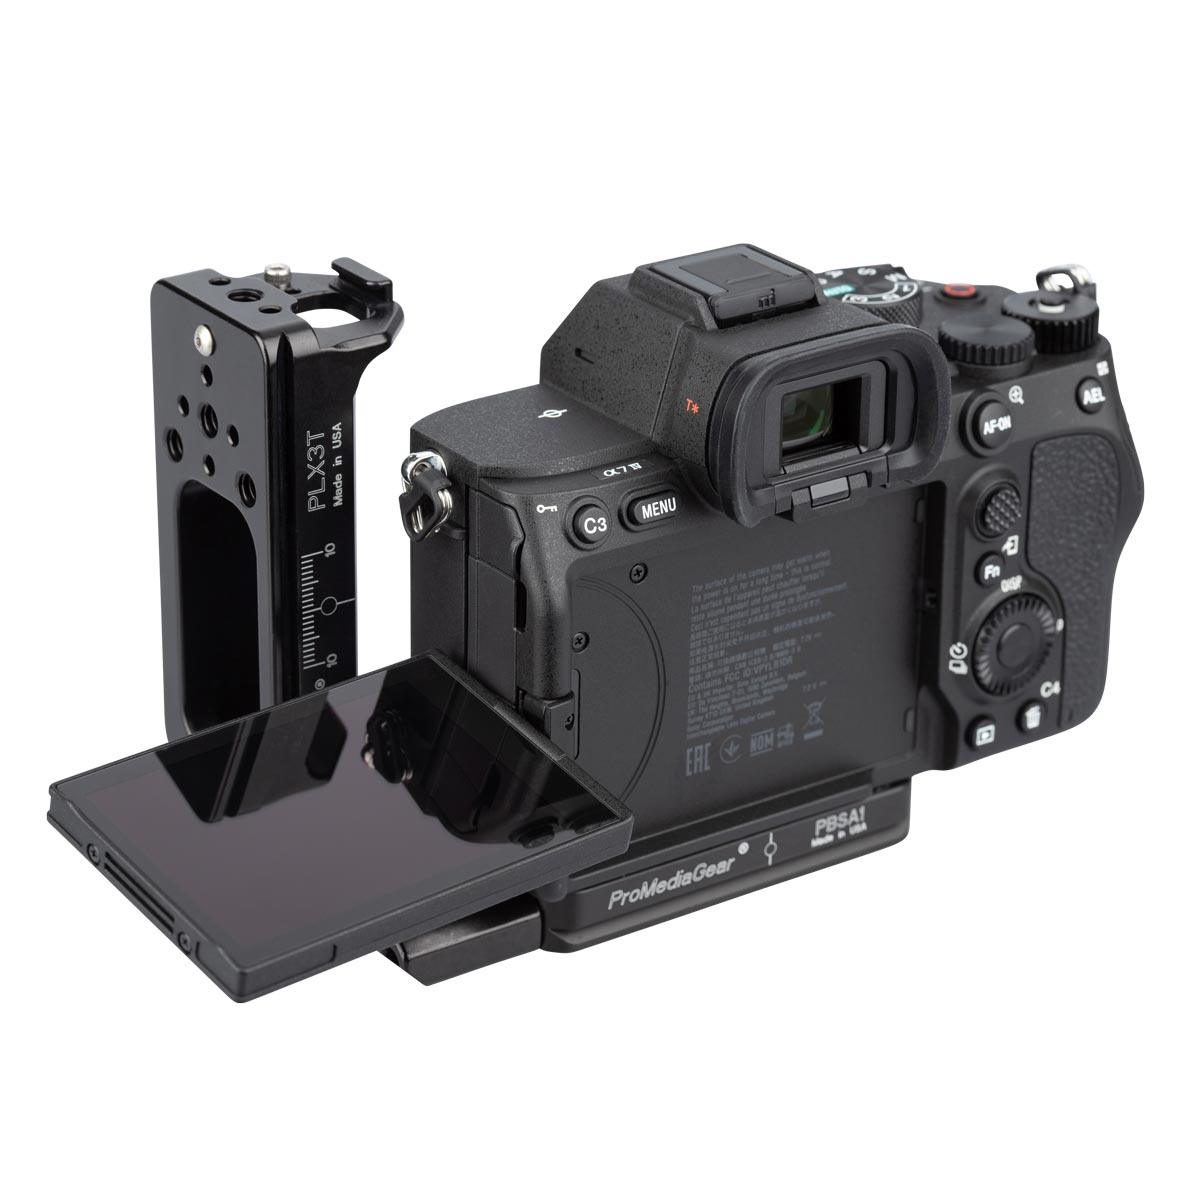 Free up the Sony A7 IV articulating screen, has no restrictions when using ProMediaGear Brackets